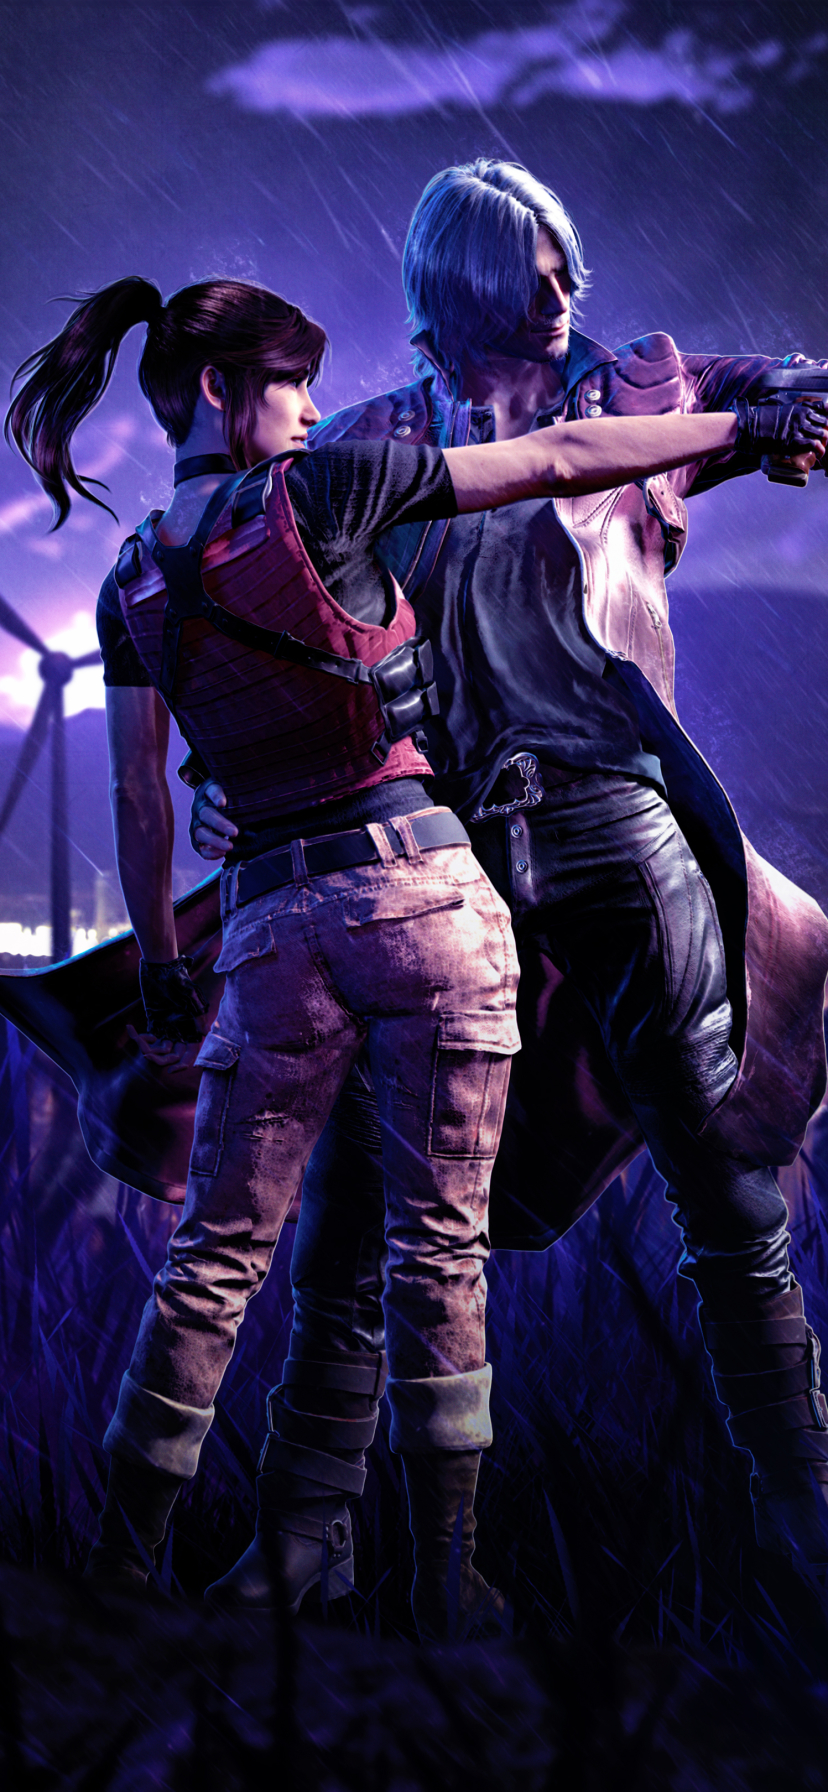 Claire Redfield and Dante shooting zombies by LitoPerezito